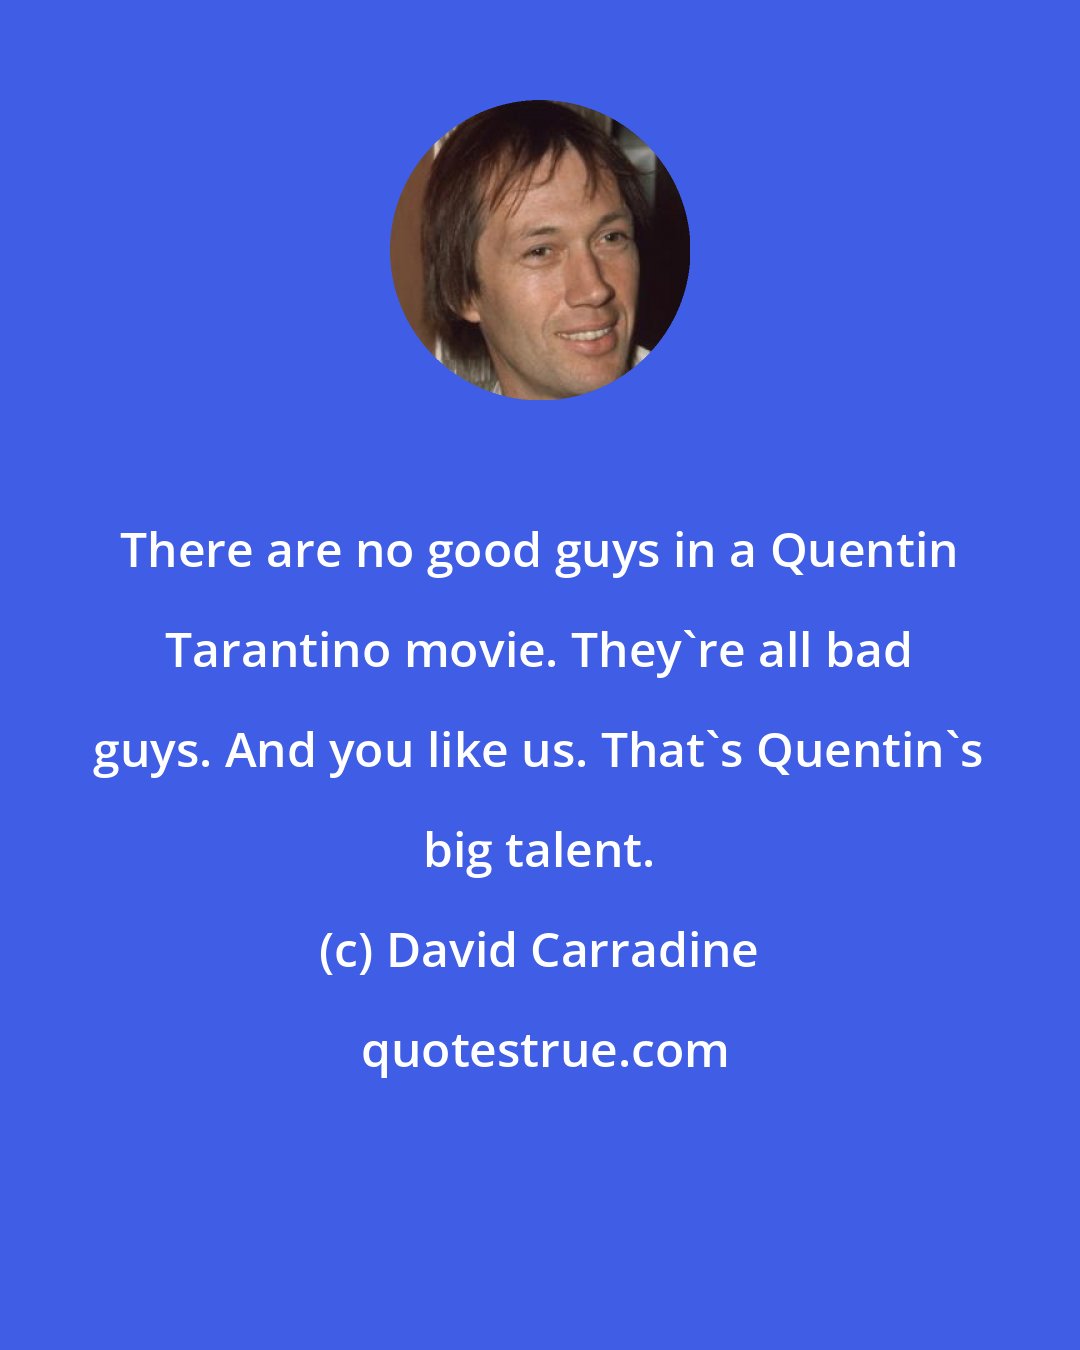 David Carradine: There are no good guys in a Quentin Tarantino movie. They're all bad guys. And you like us. That's Quentin's big talent.